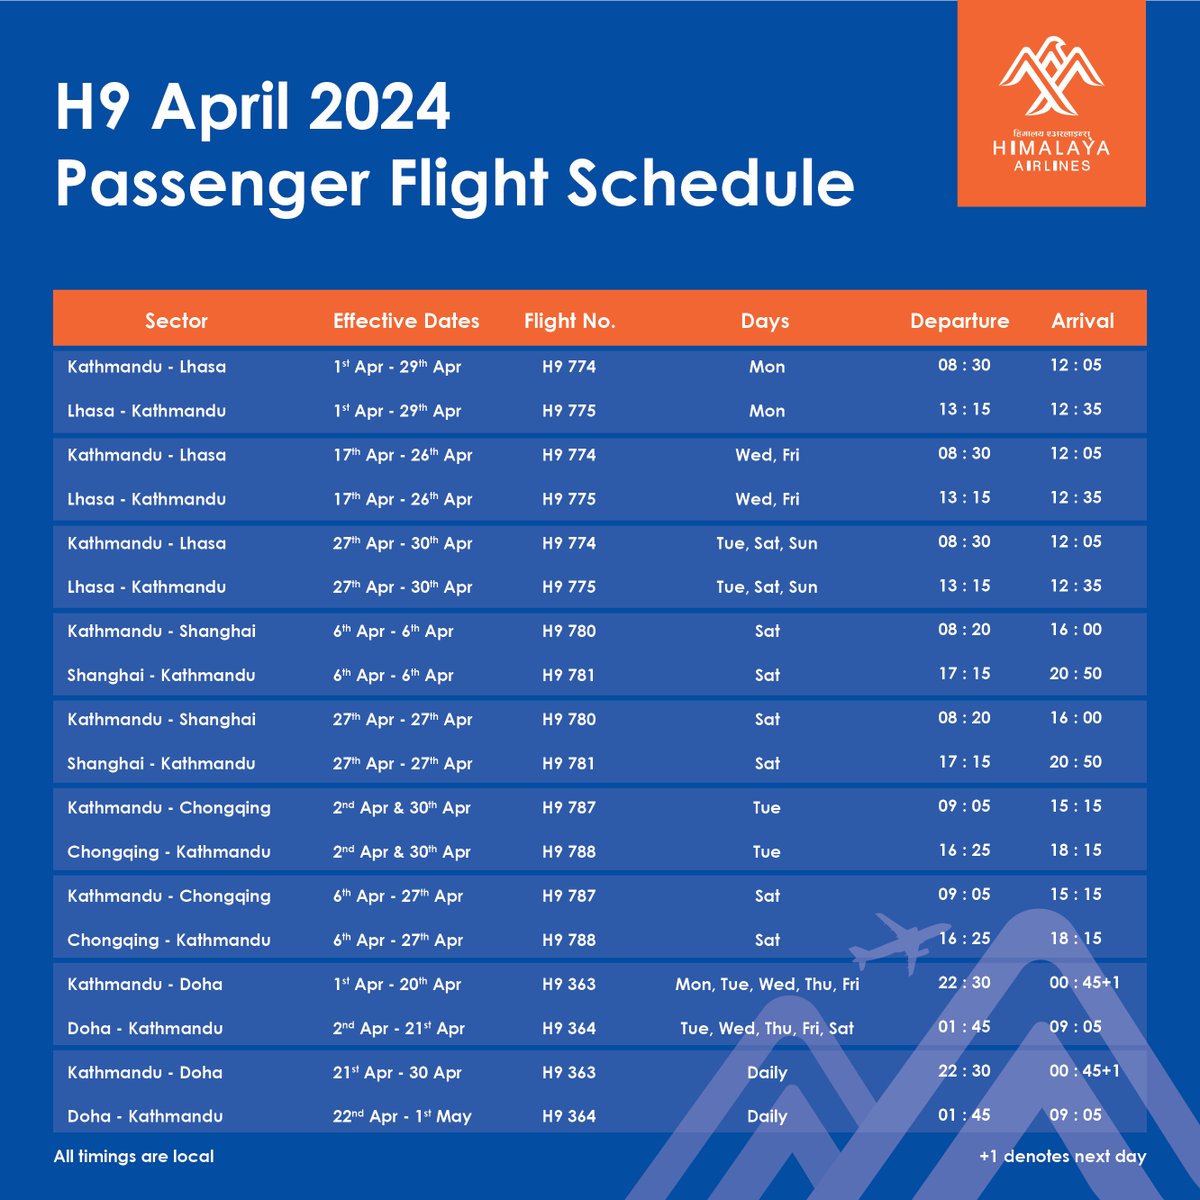 Dear Passengers,
Here is our flight schedule for April 2024!
Start booking your tickets online at
himalaya-airlines.com

#HimalayaAirlines
#FlightSchedule
#passengerflights
#September2023
#TravelNepal
#ExploreNepal
#FlyWithHimalayaAirlines